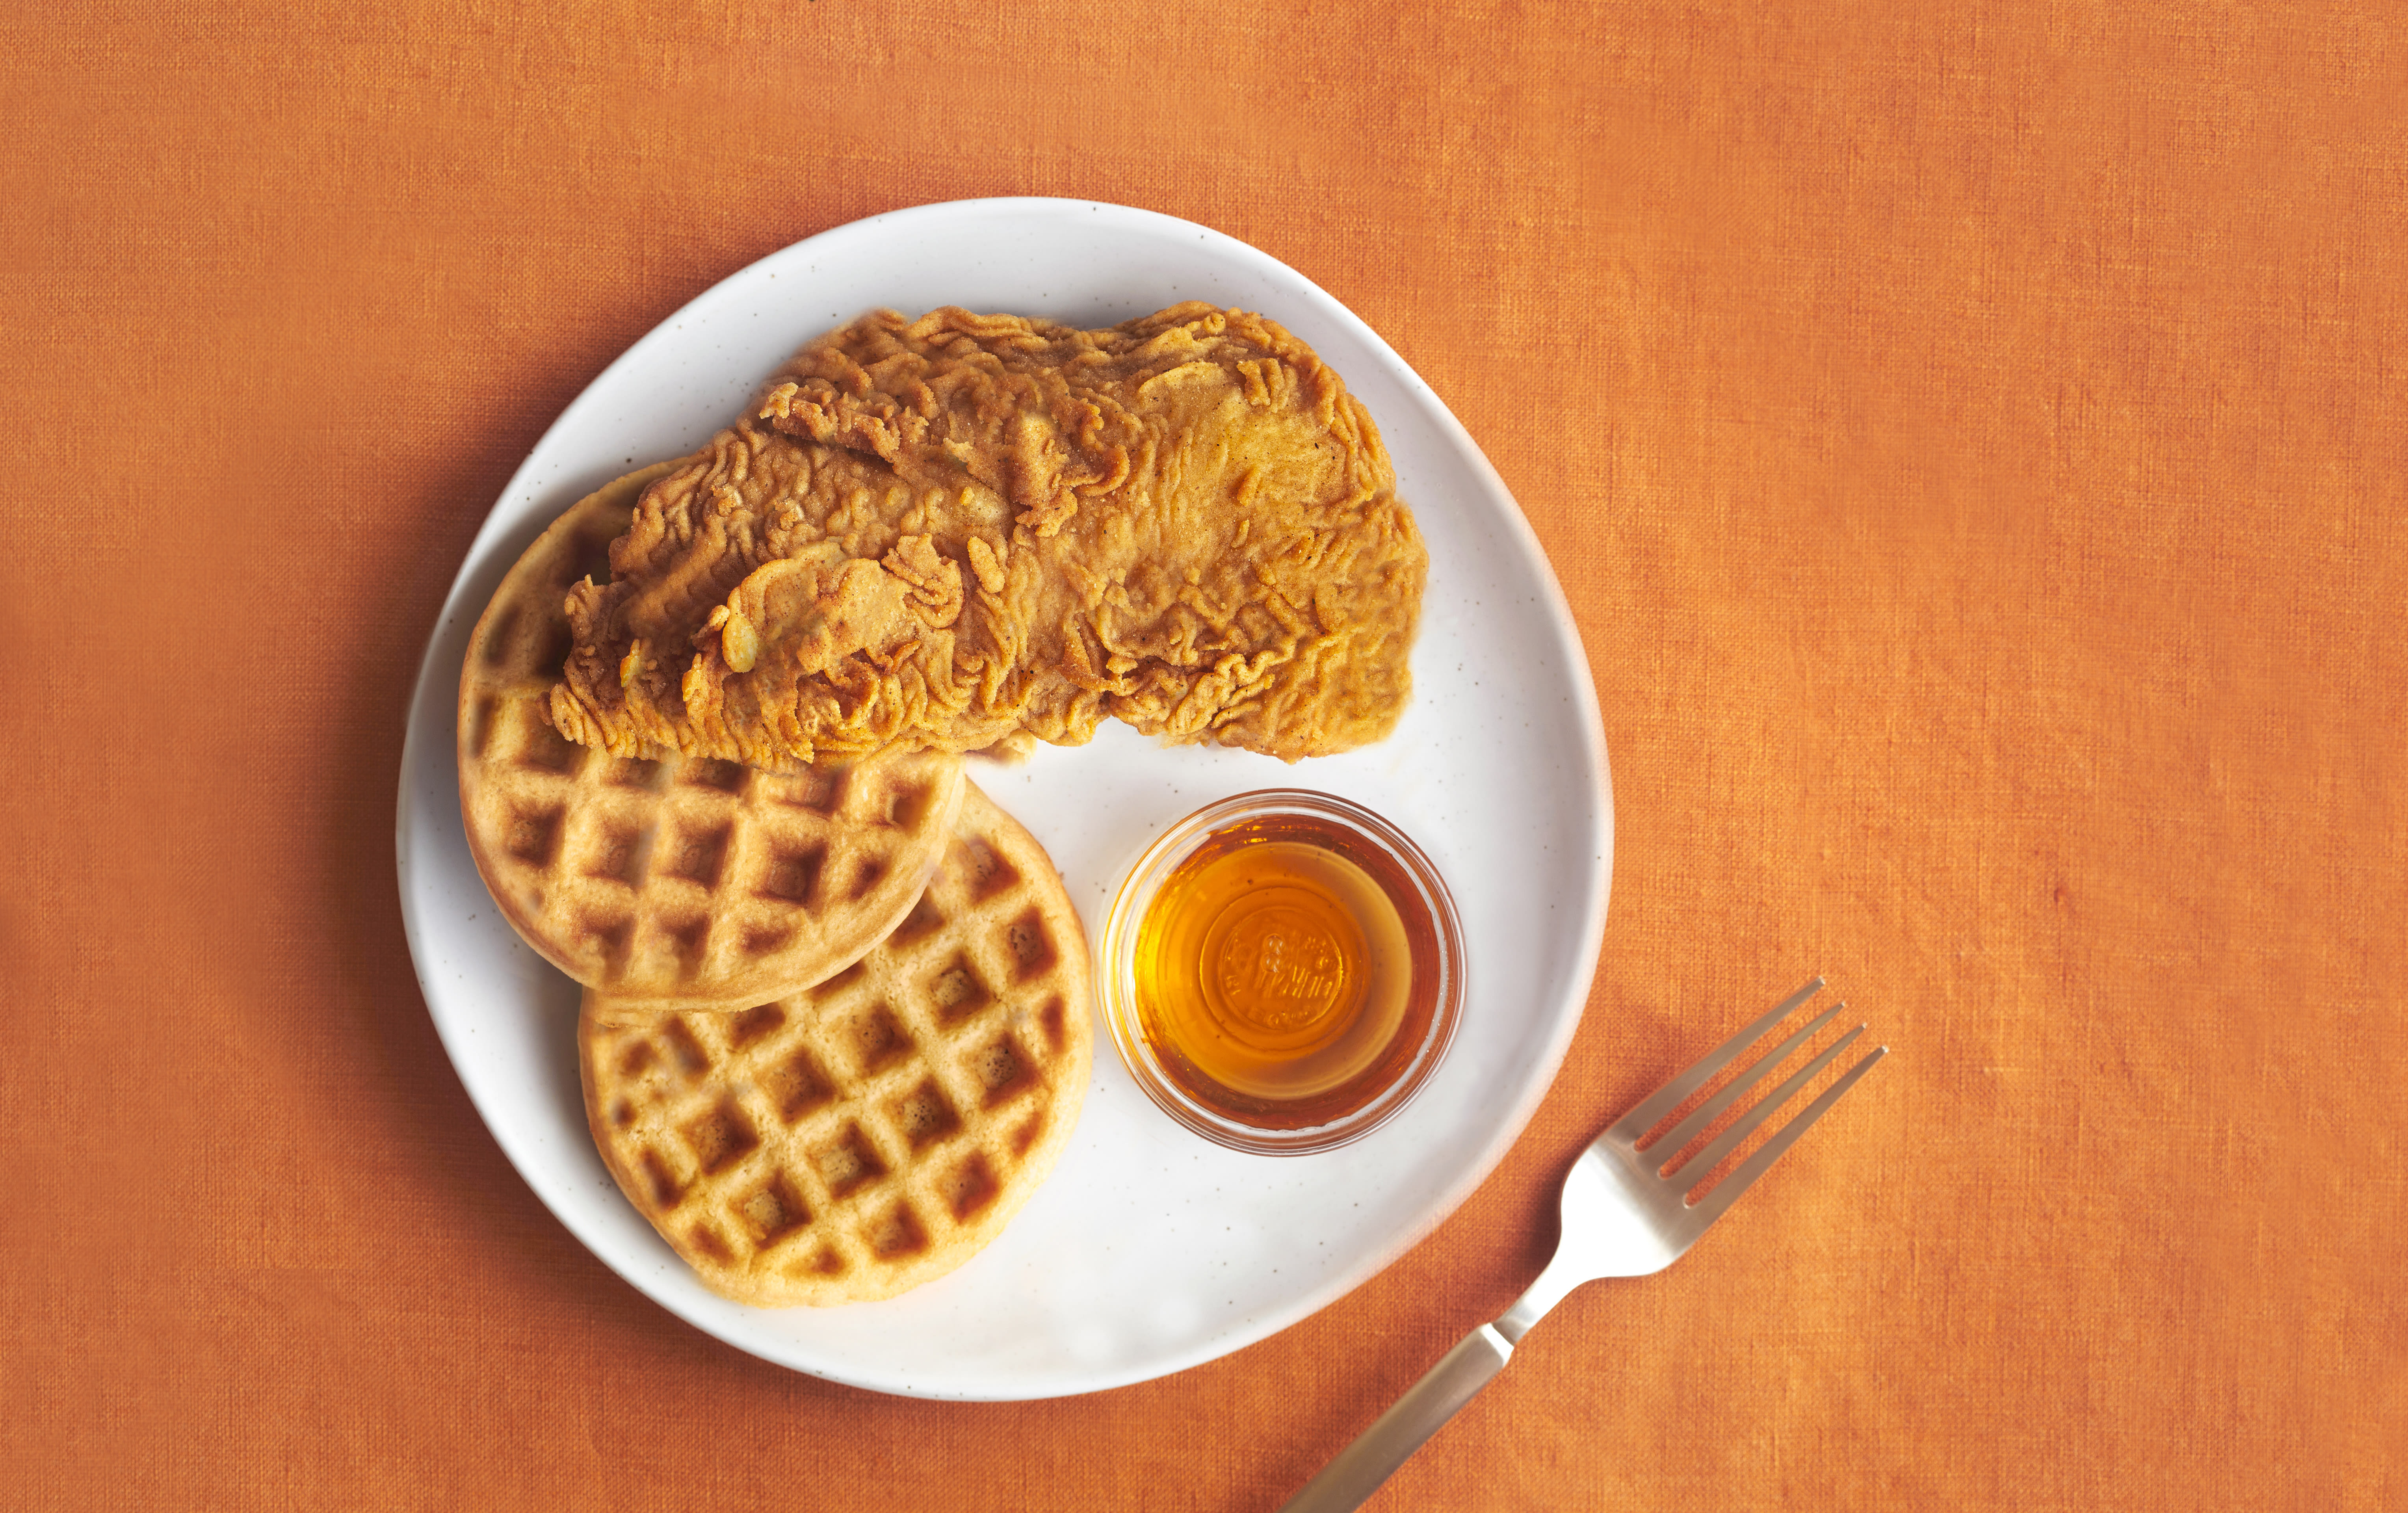 Chicken and waffles made with UPSIDE Foods' cultivated meat